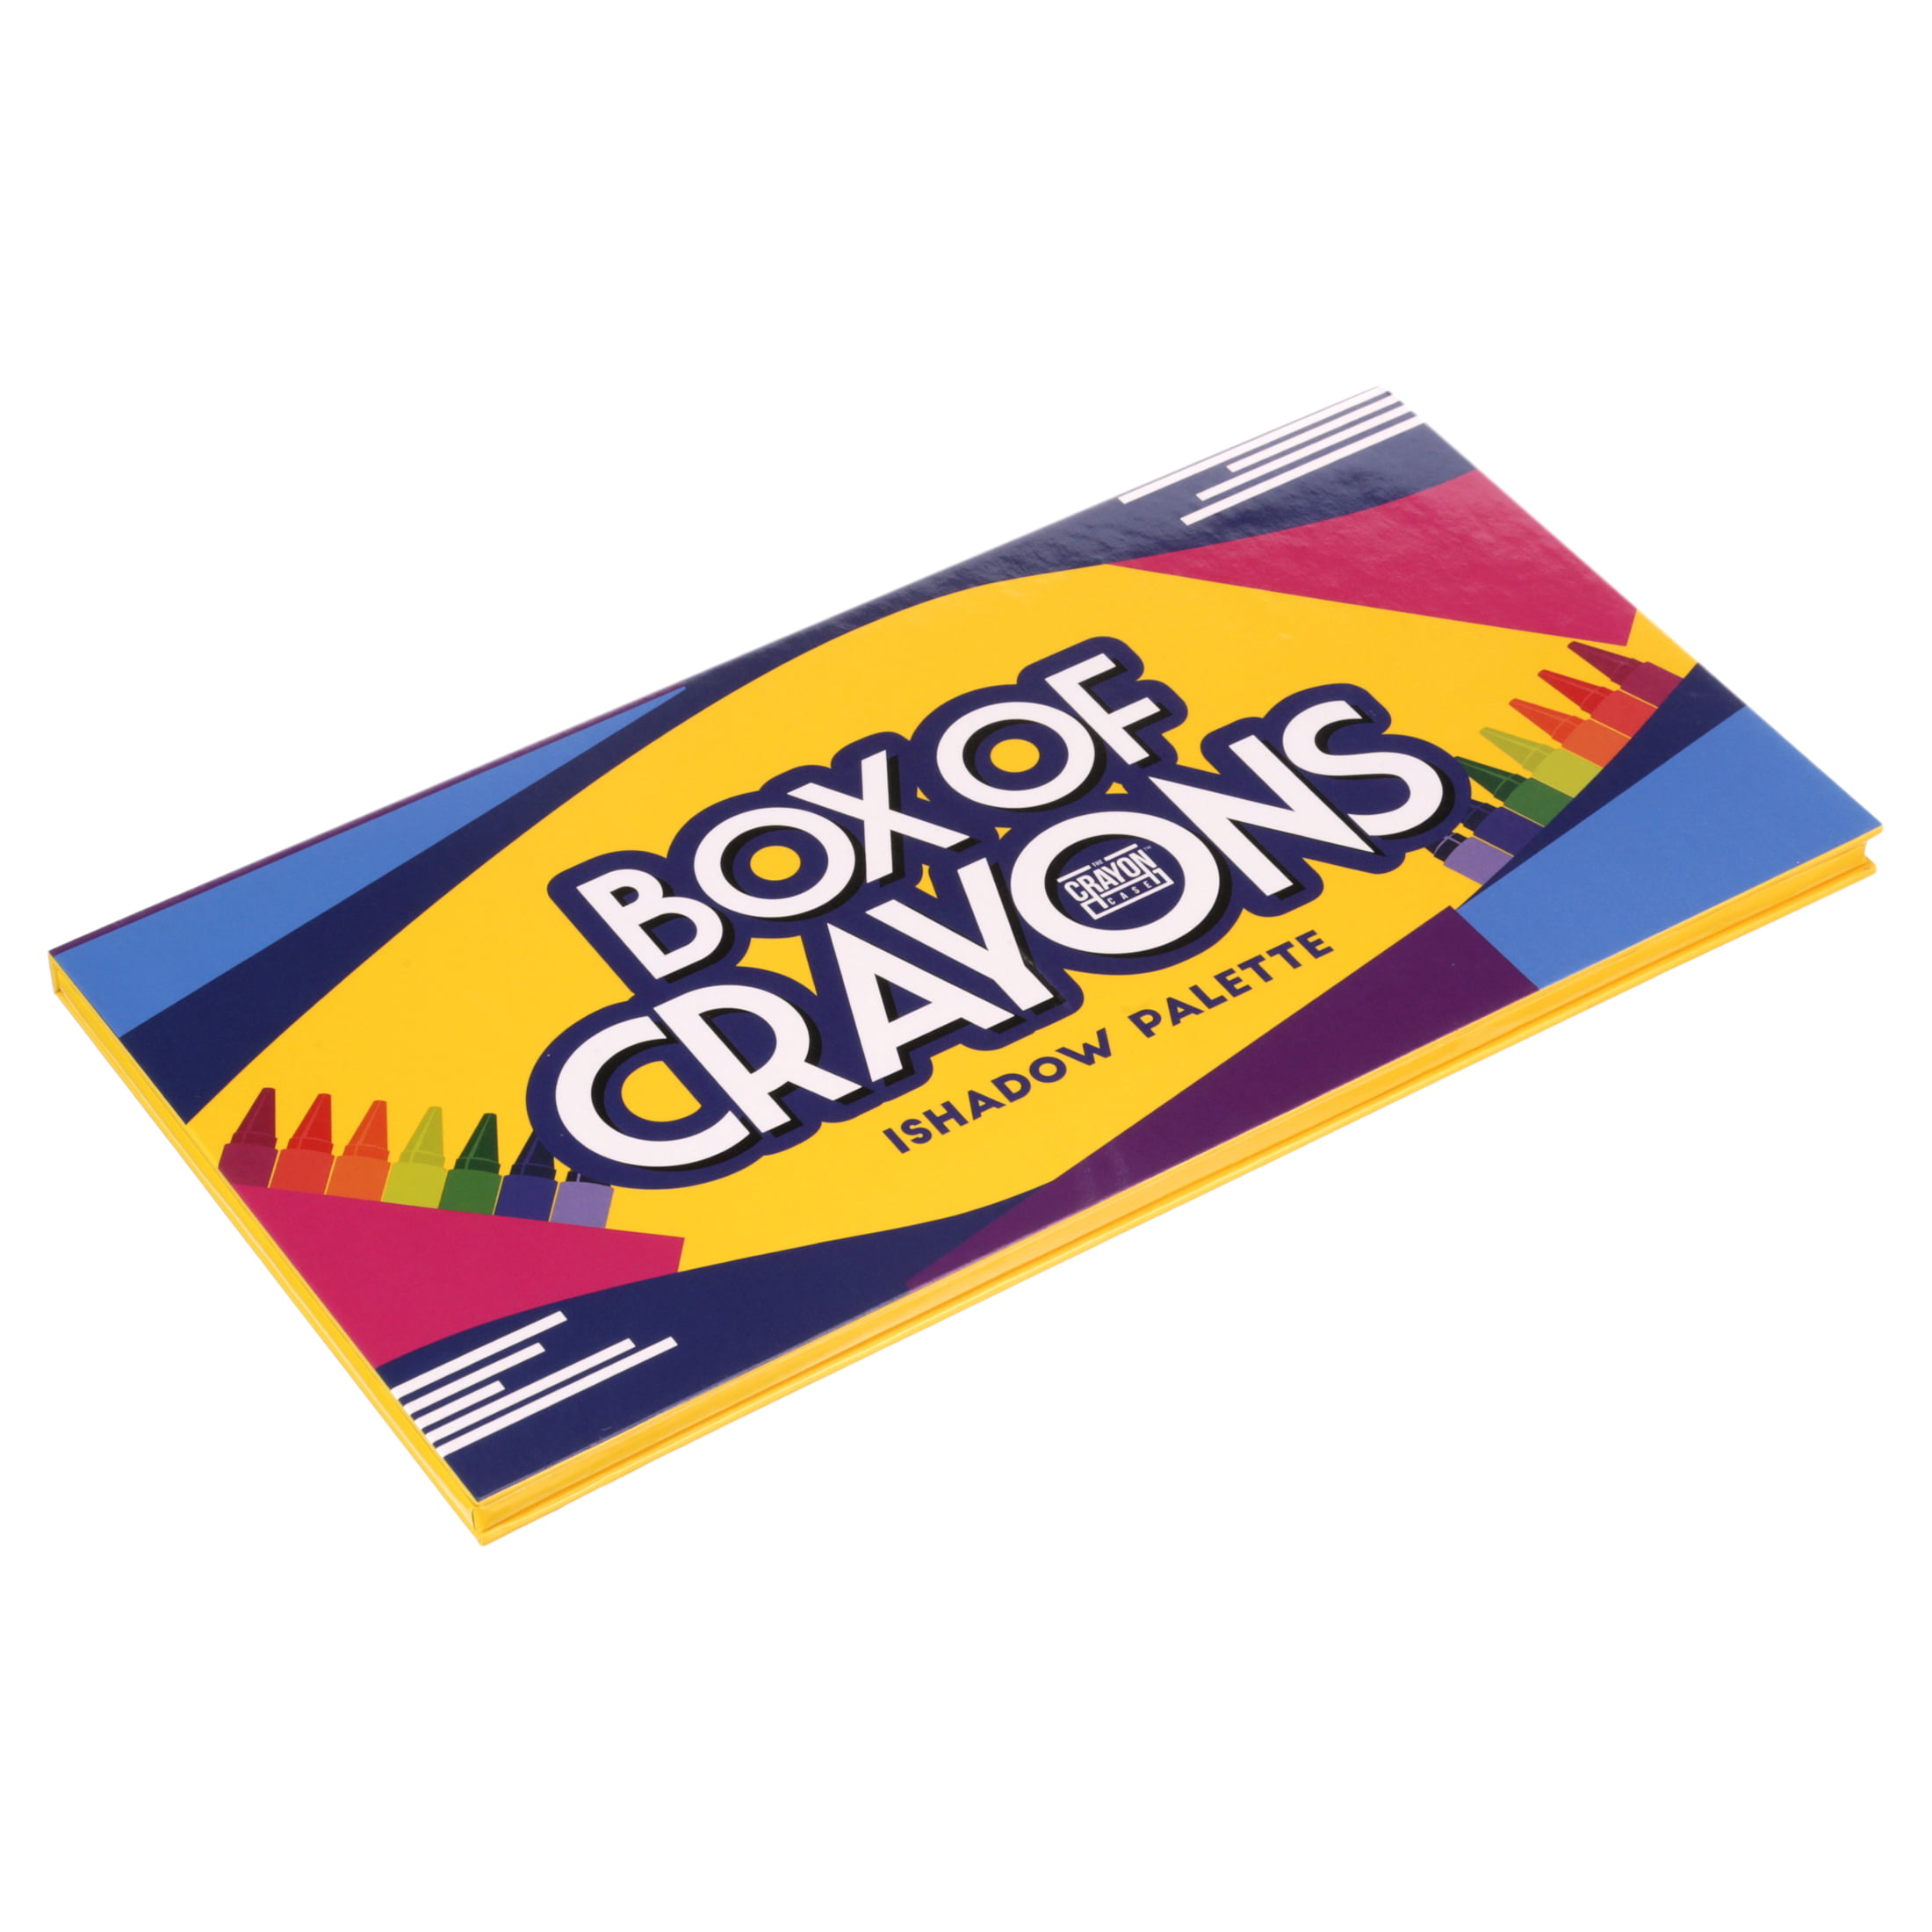 The Crayon Case Box of Crayons Eyeshadow Palette